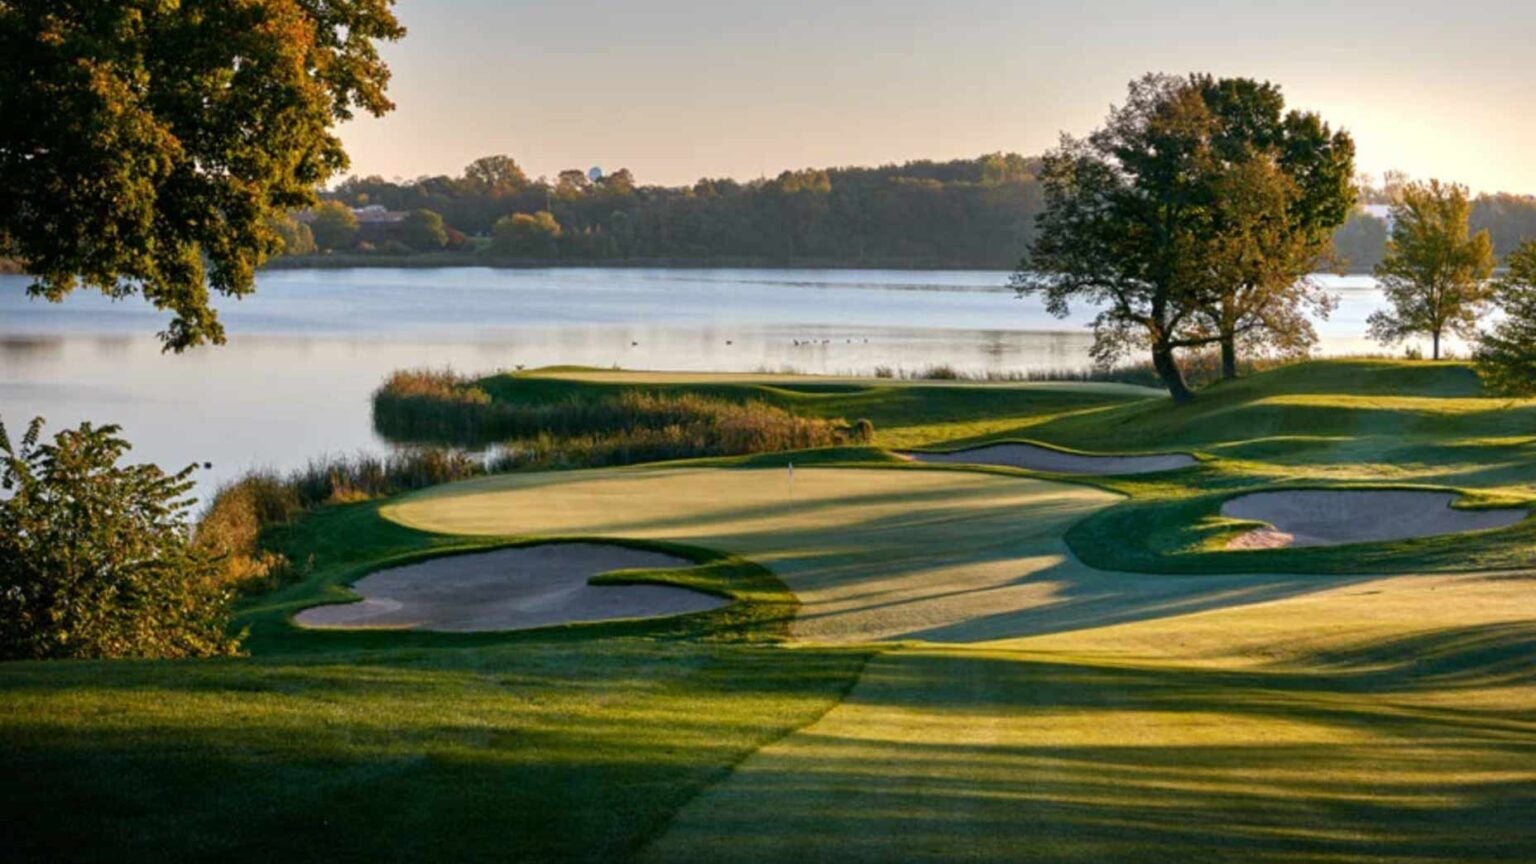 Best golf courses in Minnesota, according to GOLF Magazine's raters